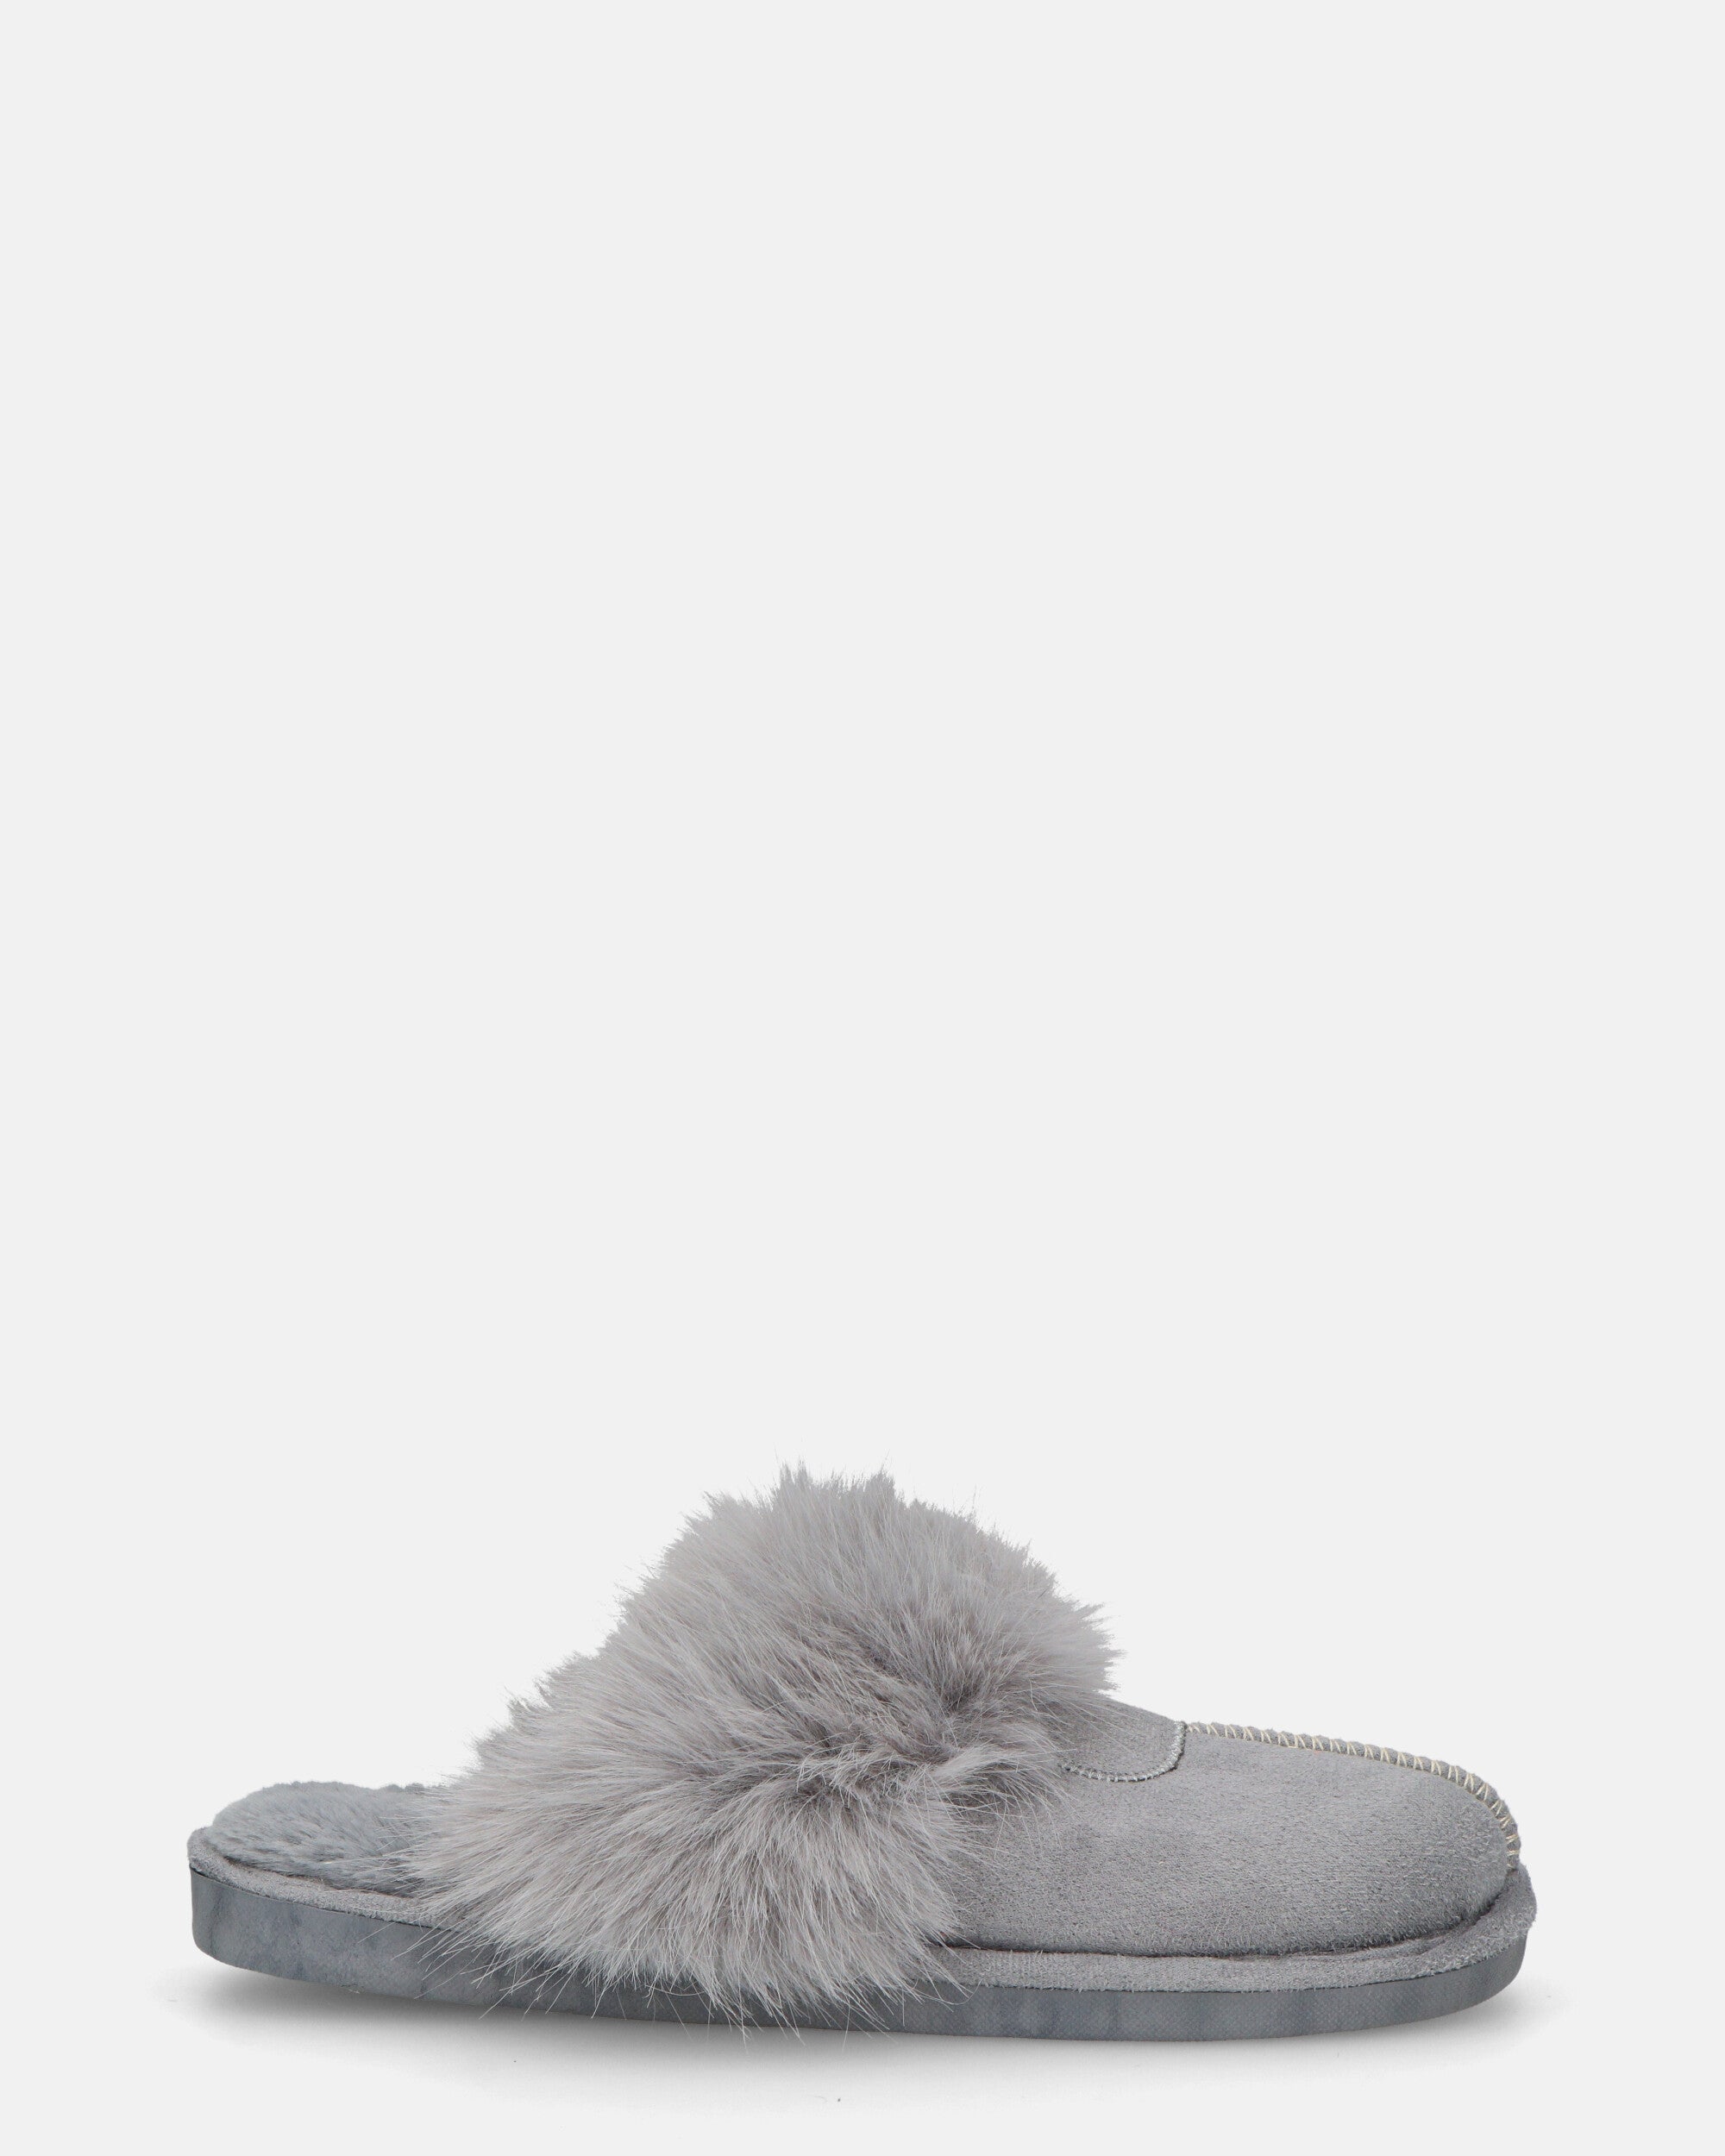 MIDORI - grey slippers with fur and suede